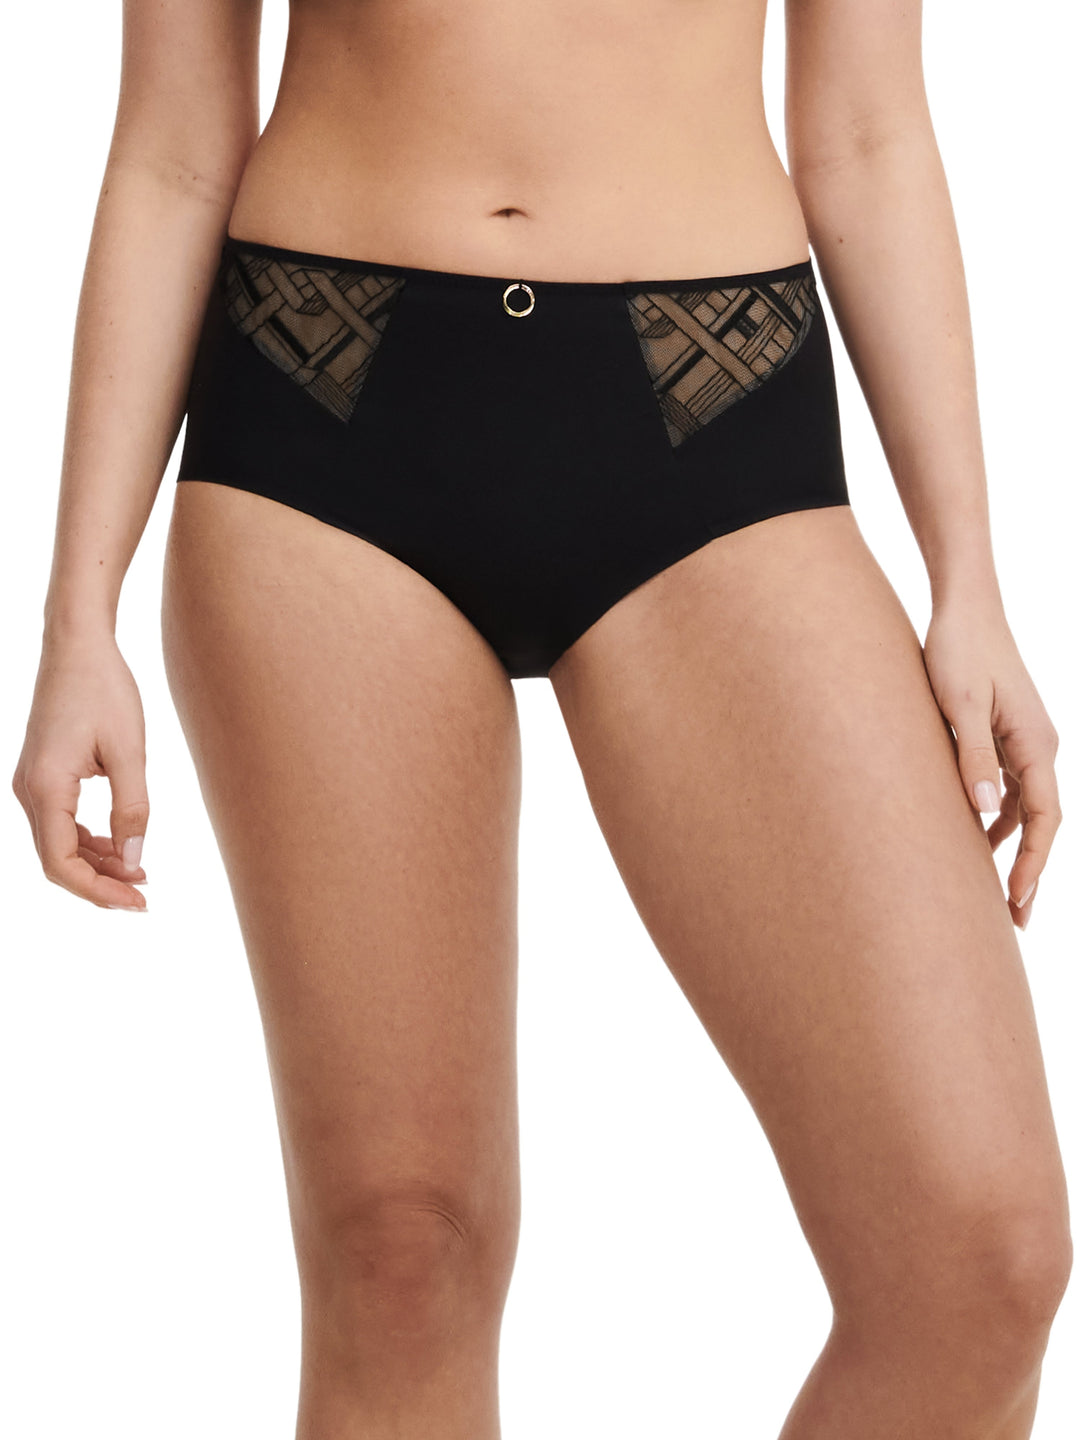 Chantelle - Graphic Support High Waisted Support Full Brief Black Full Brief Chantelle 